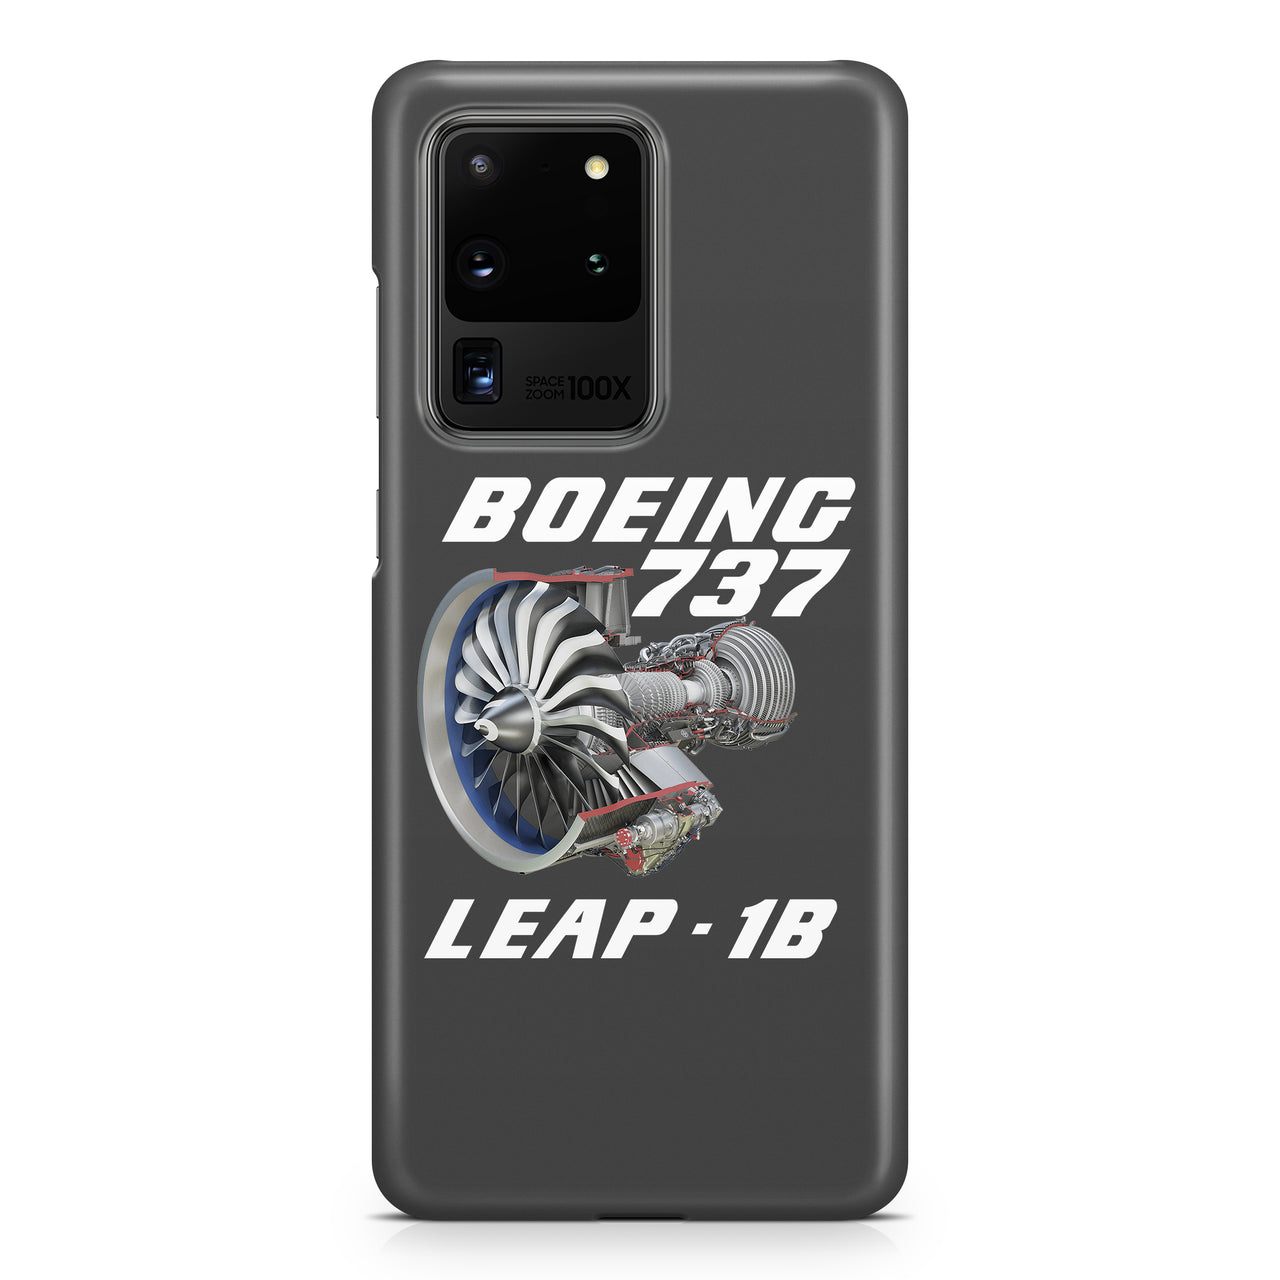 Boeing 737 & Leap 1B Samsung S & Note Cases